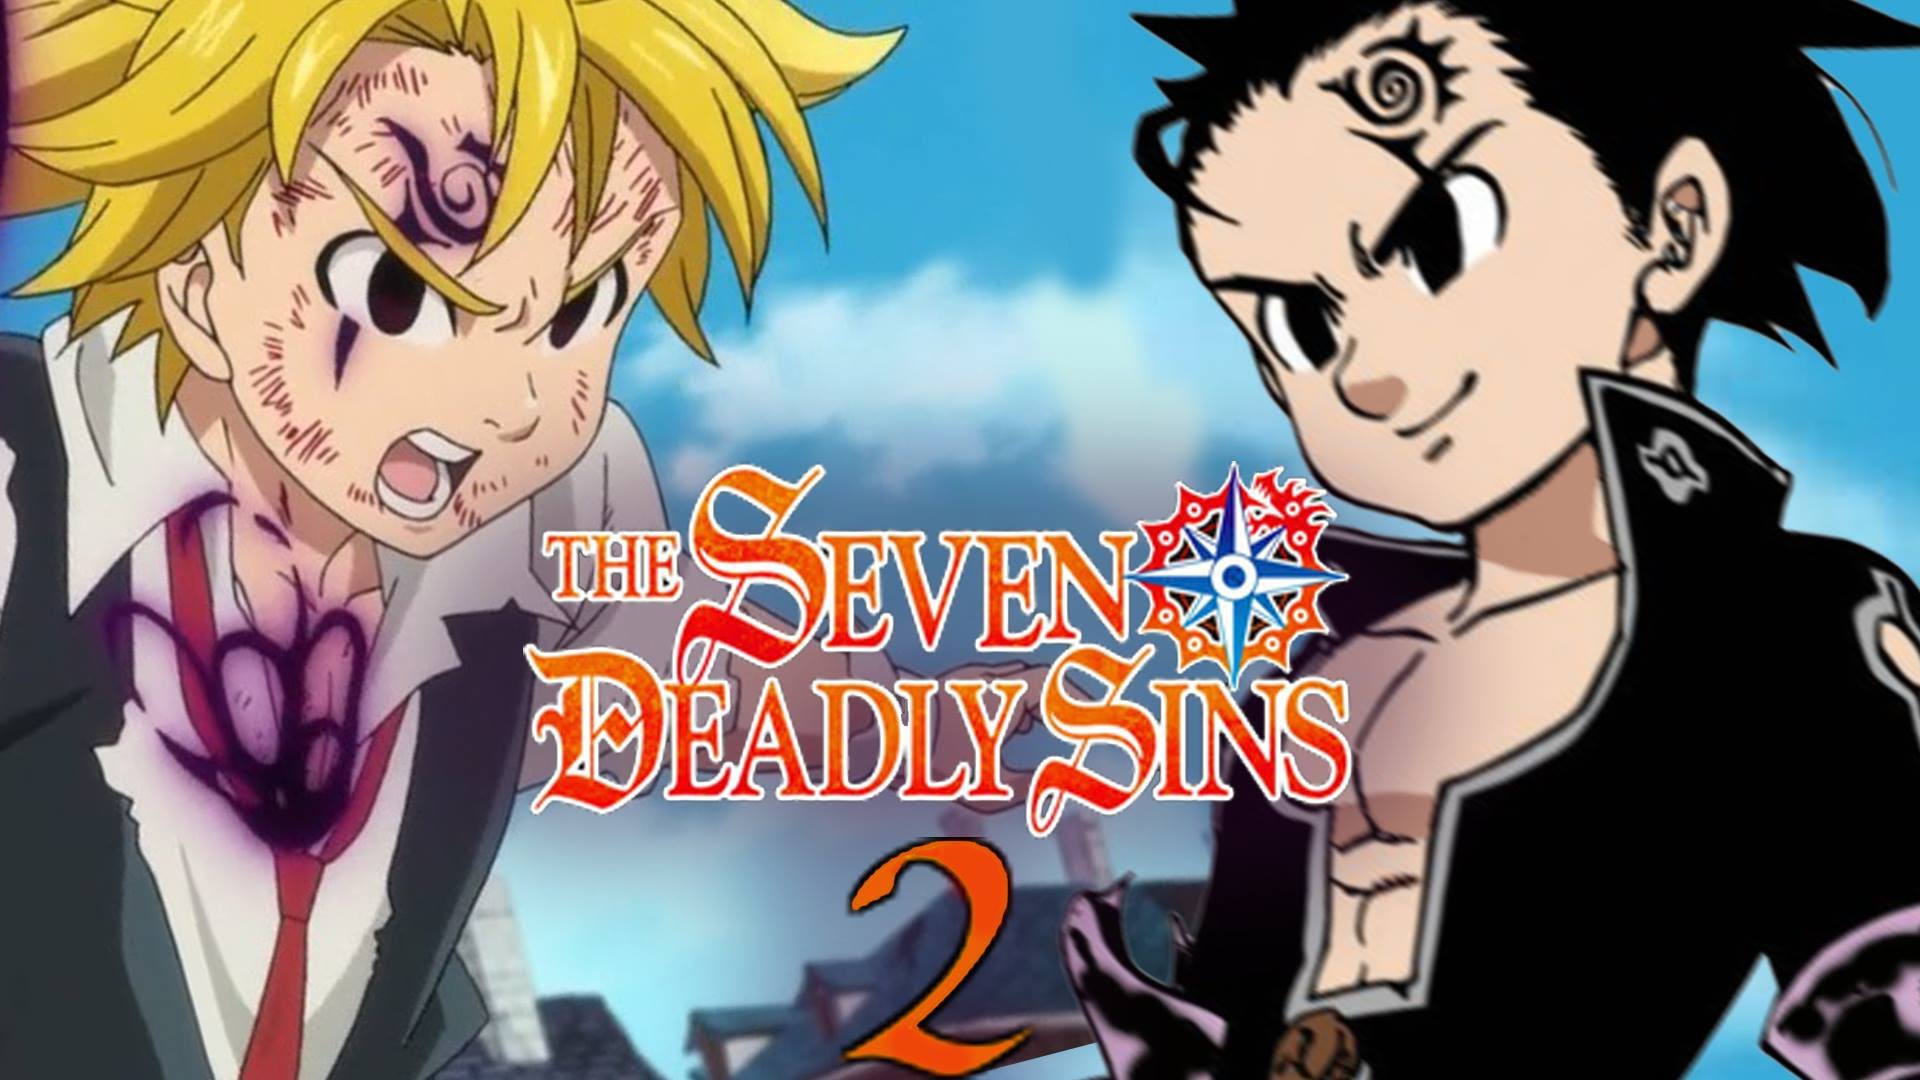 The Seven Deadly Sins Wallpapers Anime Hq The Seven Deadly Sins